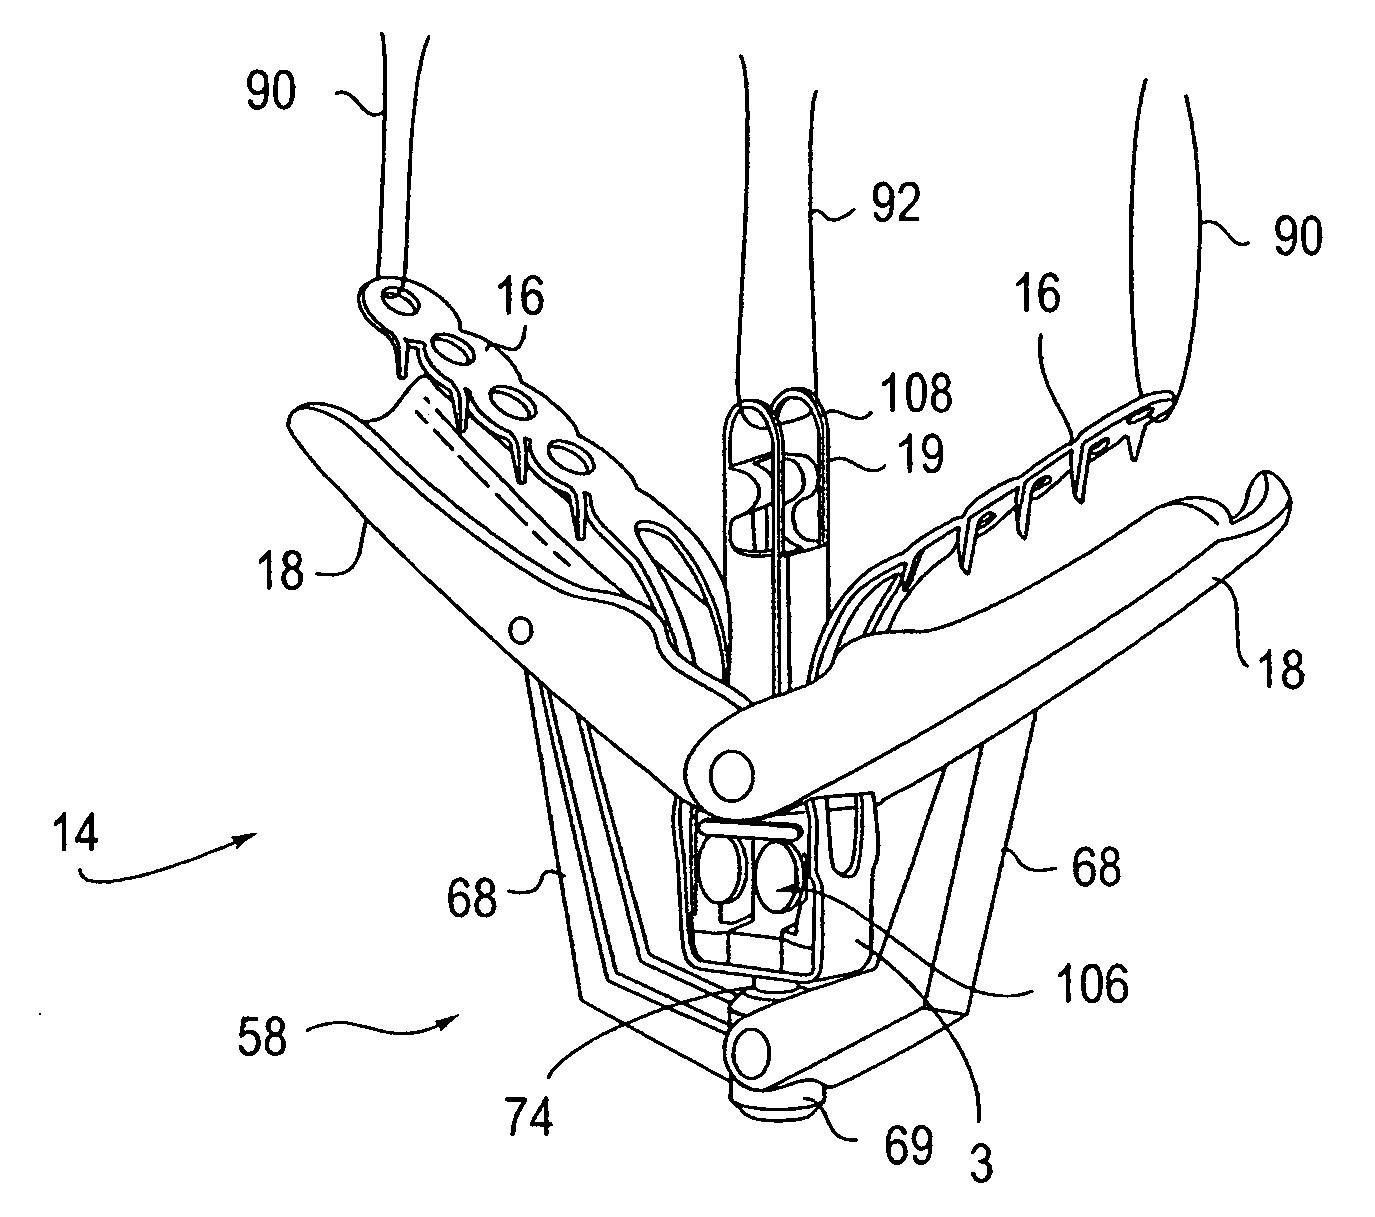 Locking mechanisms for fixation devices and methods of engaging tissue